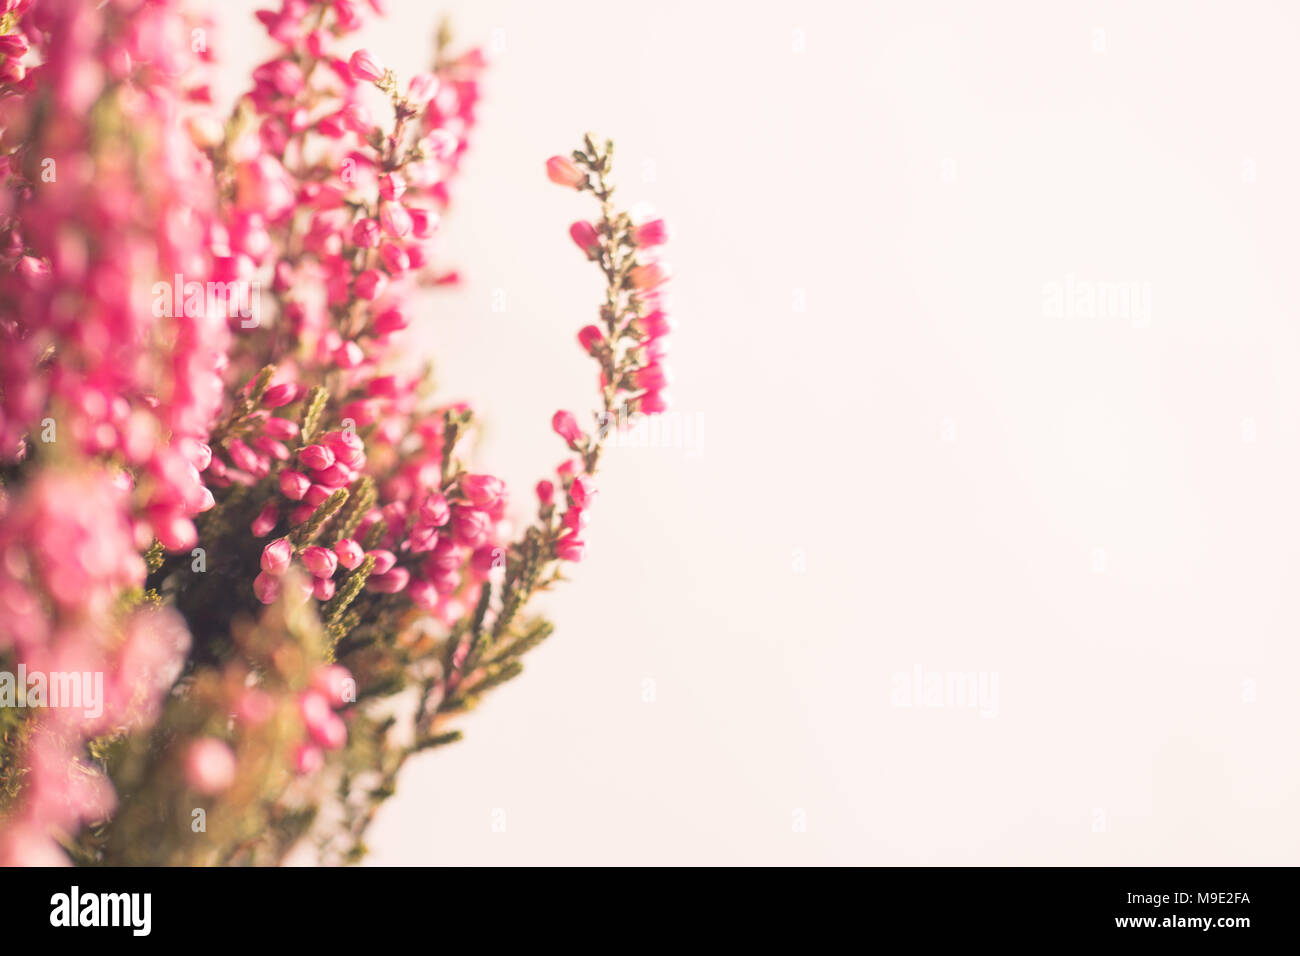 Heather flowers in gray flowerpot. White background. Space for text. Stock Photo